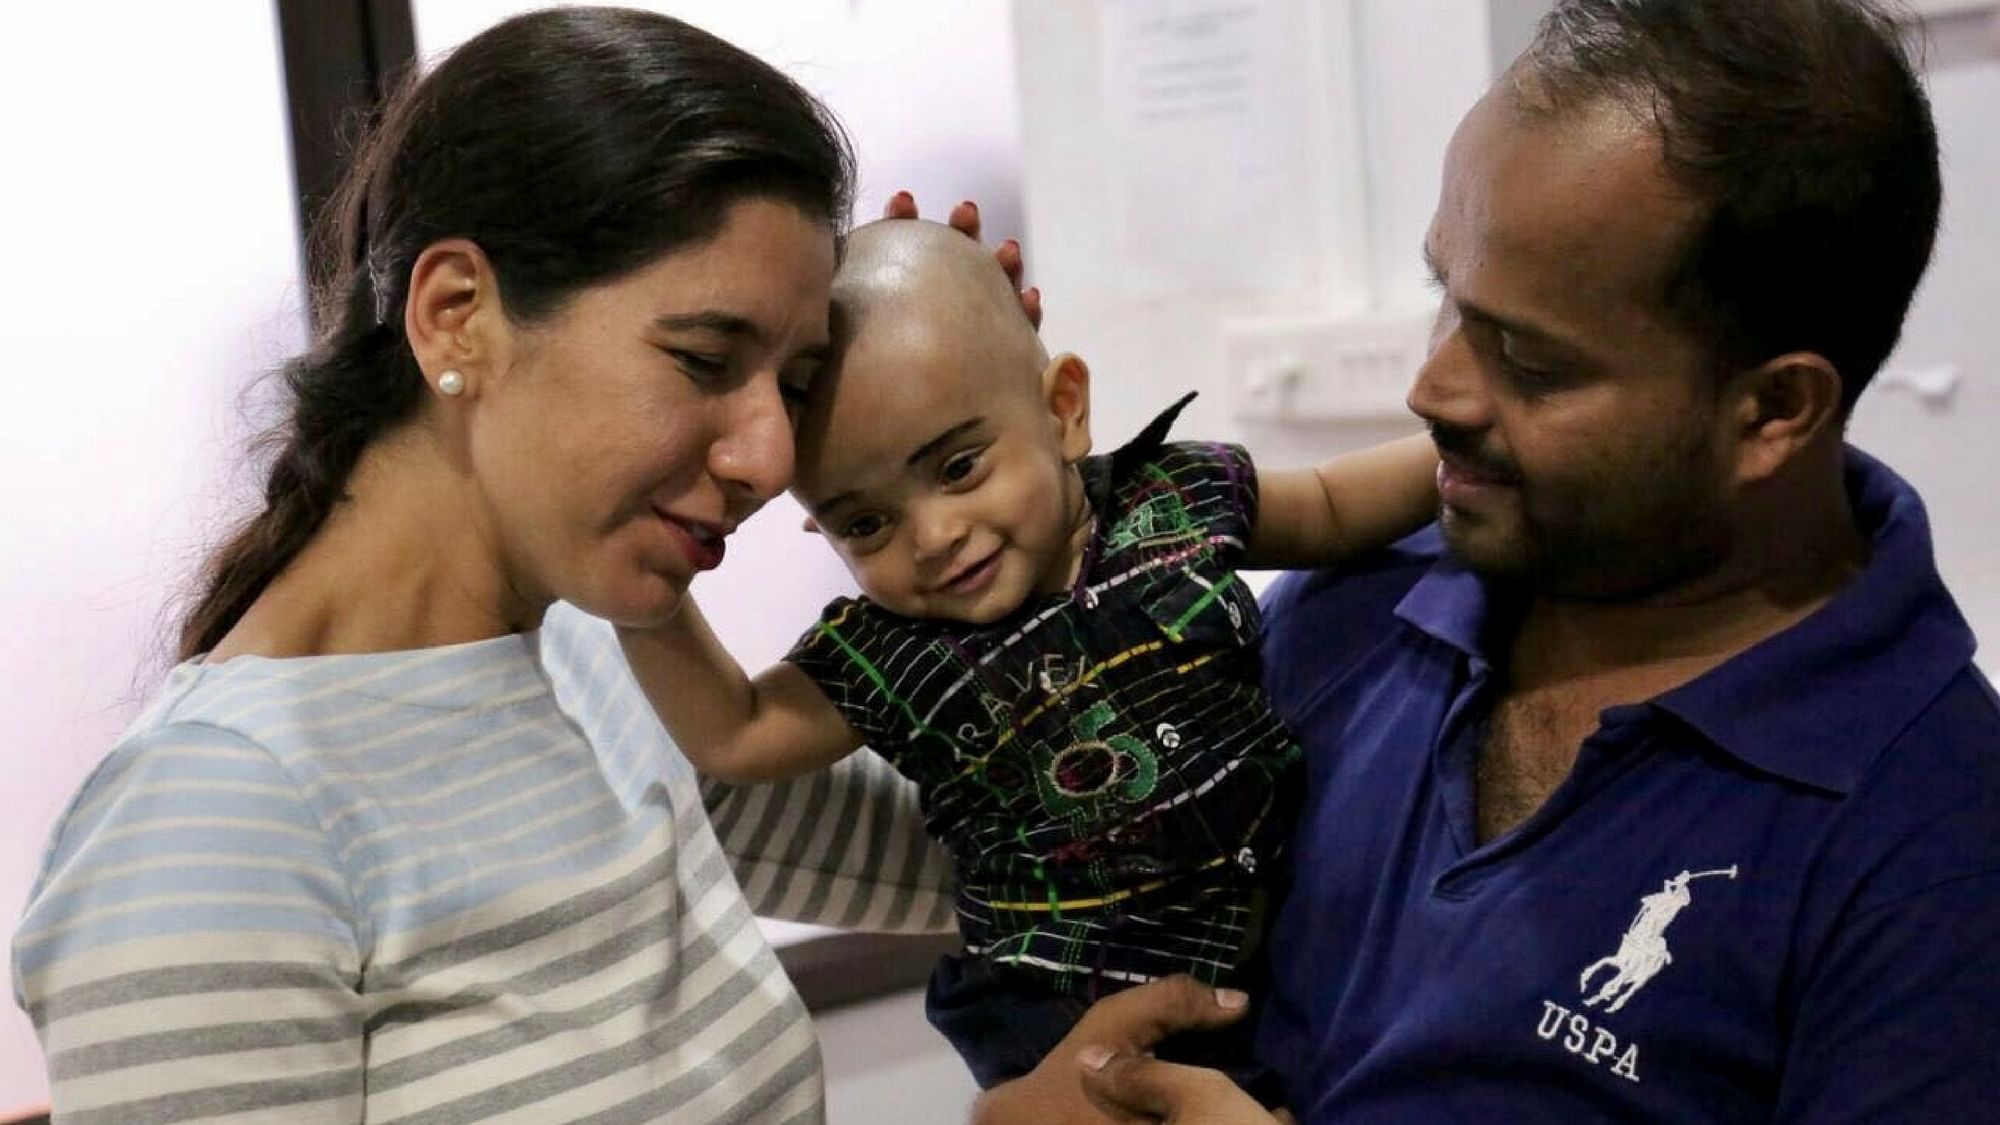 Md. Najwan, one of three sons of an auto driver, was operated on at the age of 6 months. This affectionate little boy from Malapuram district, is now 10 months old and well on his way to recovery. (Photo: <b>The Quint</b>)